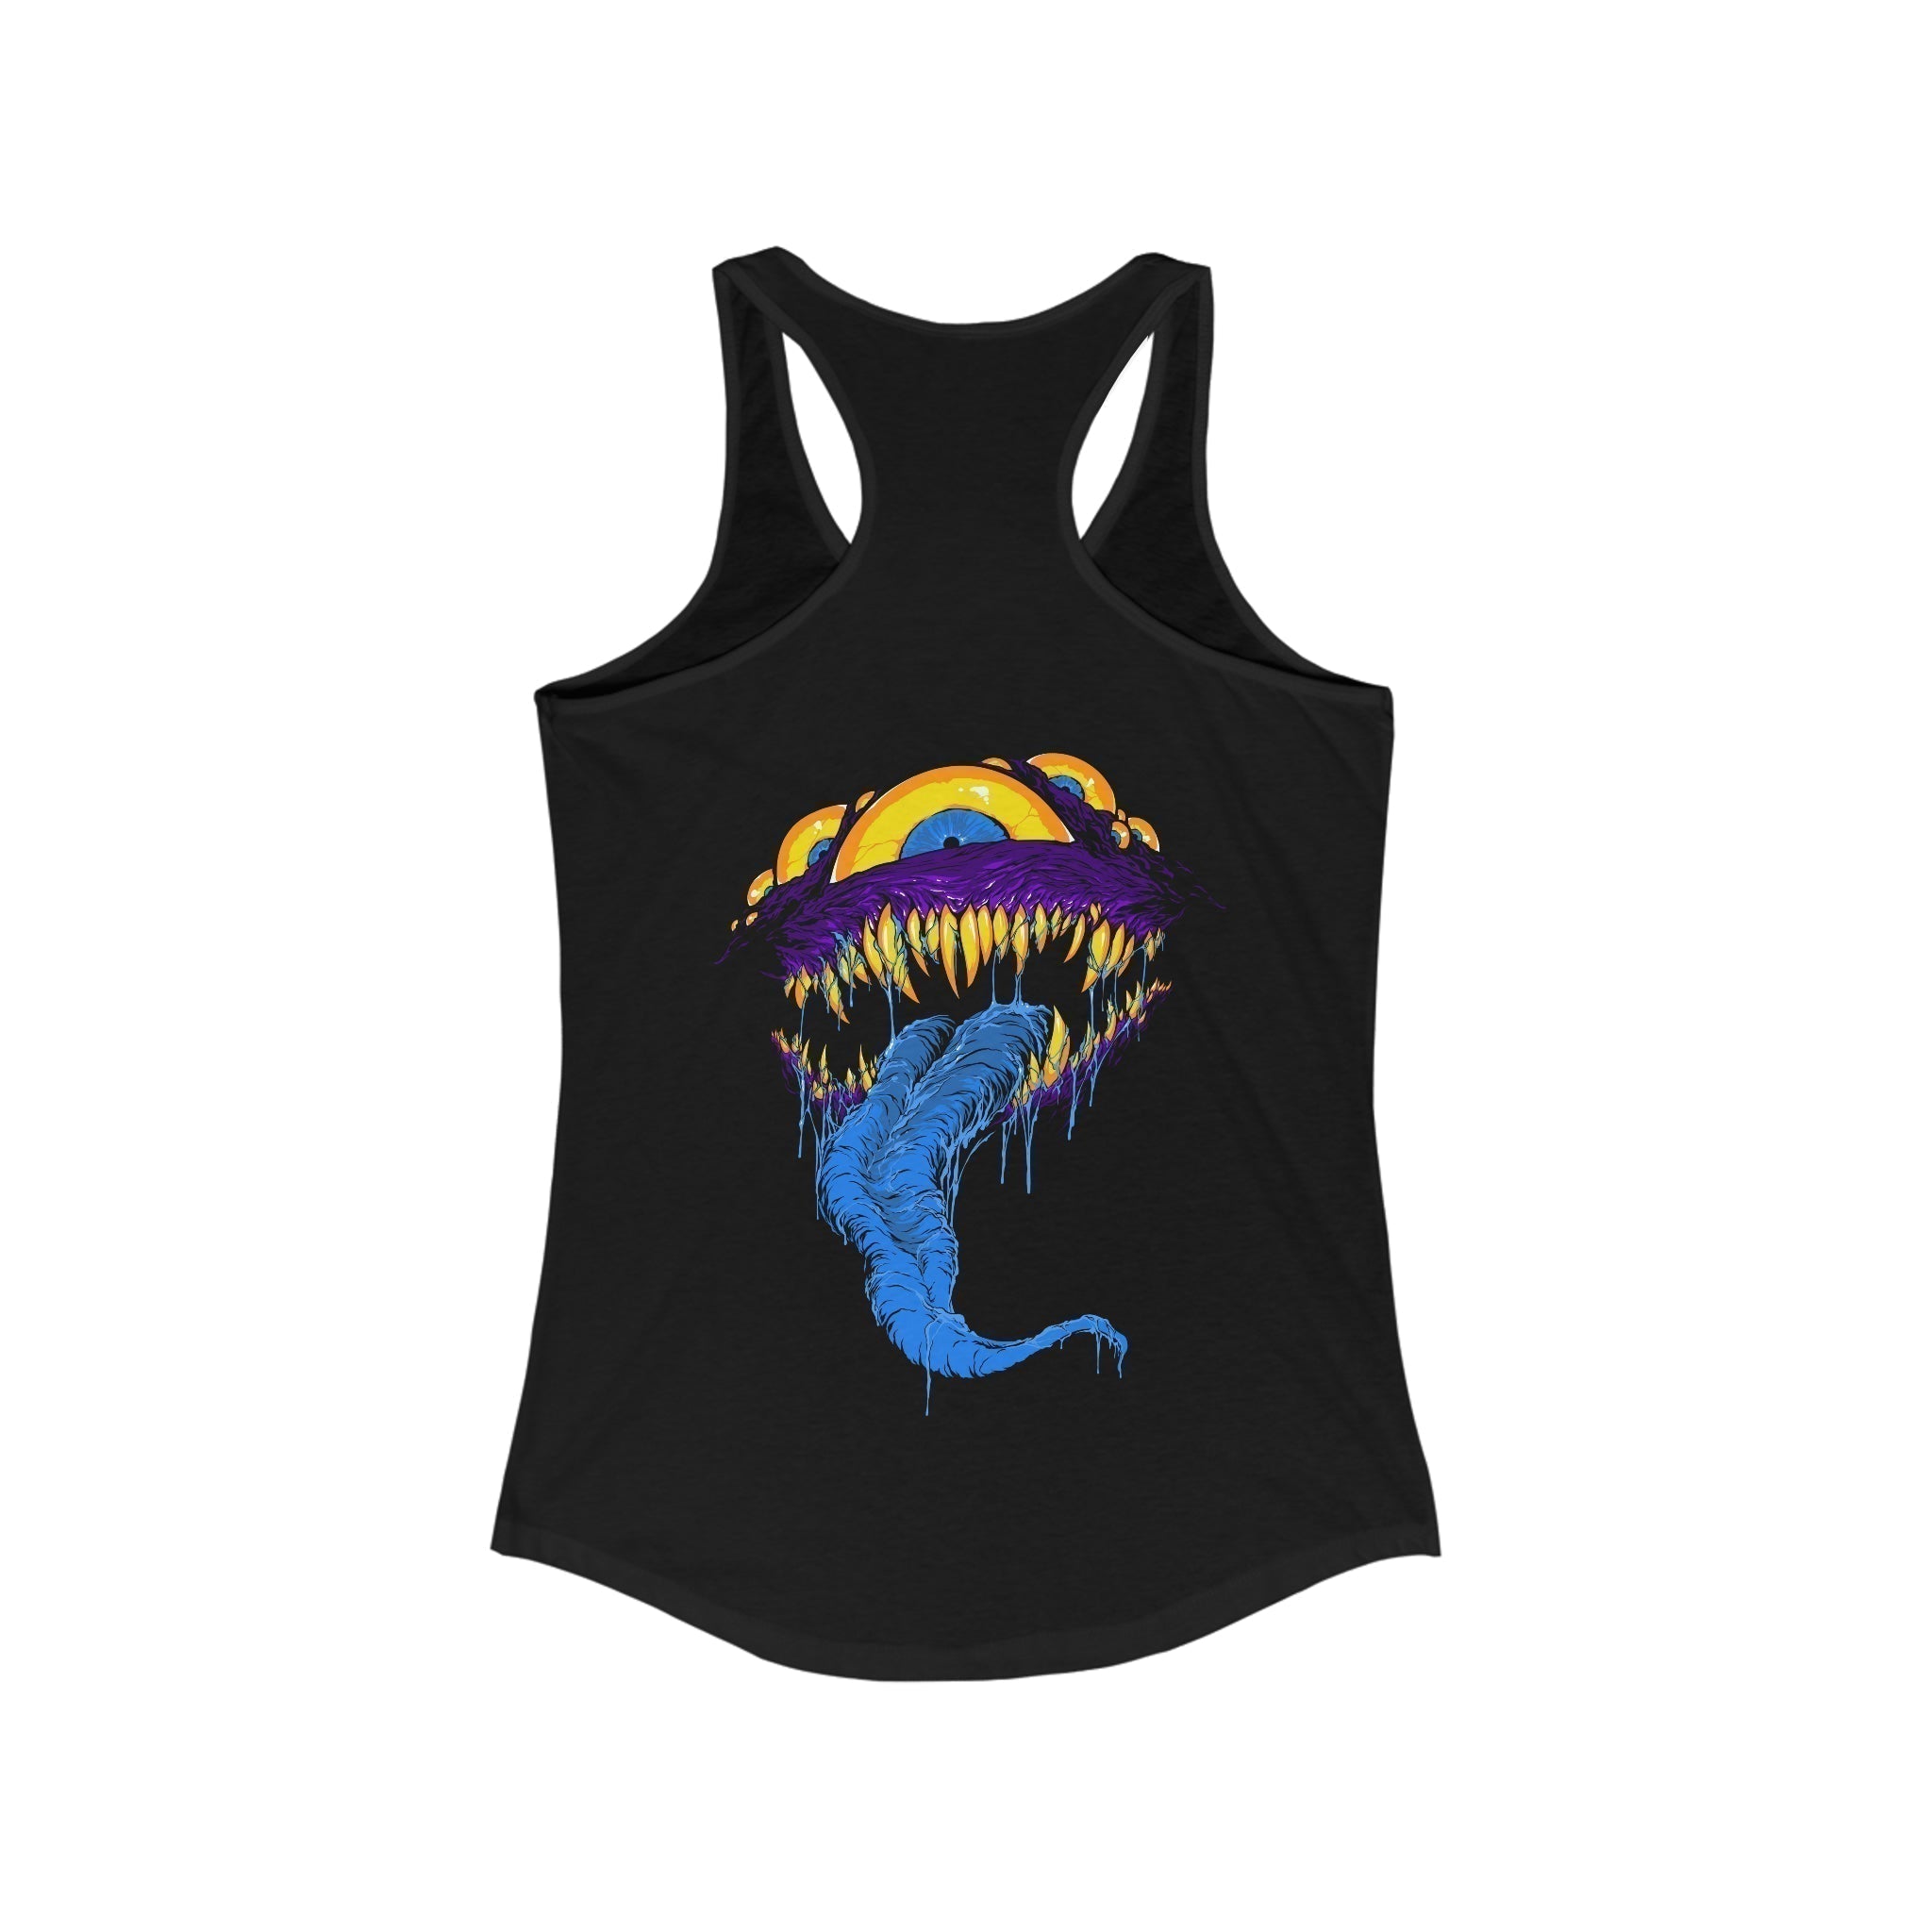 Mimic - Norse Foundry Women's Tank Top - 18041930737056901967